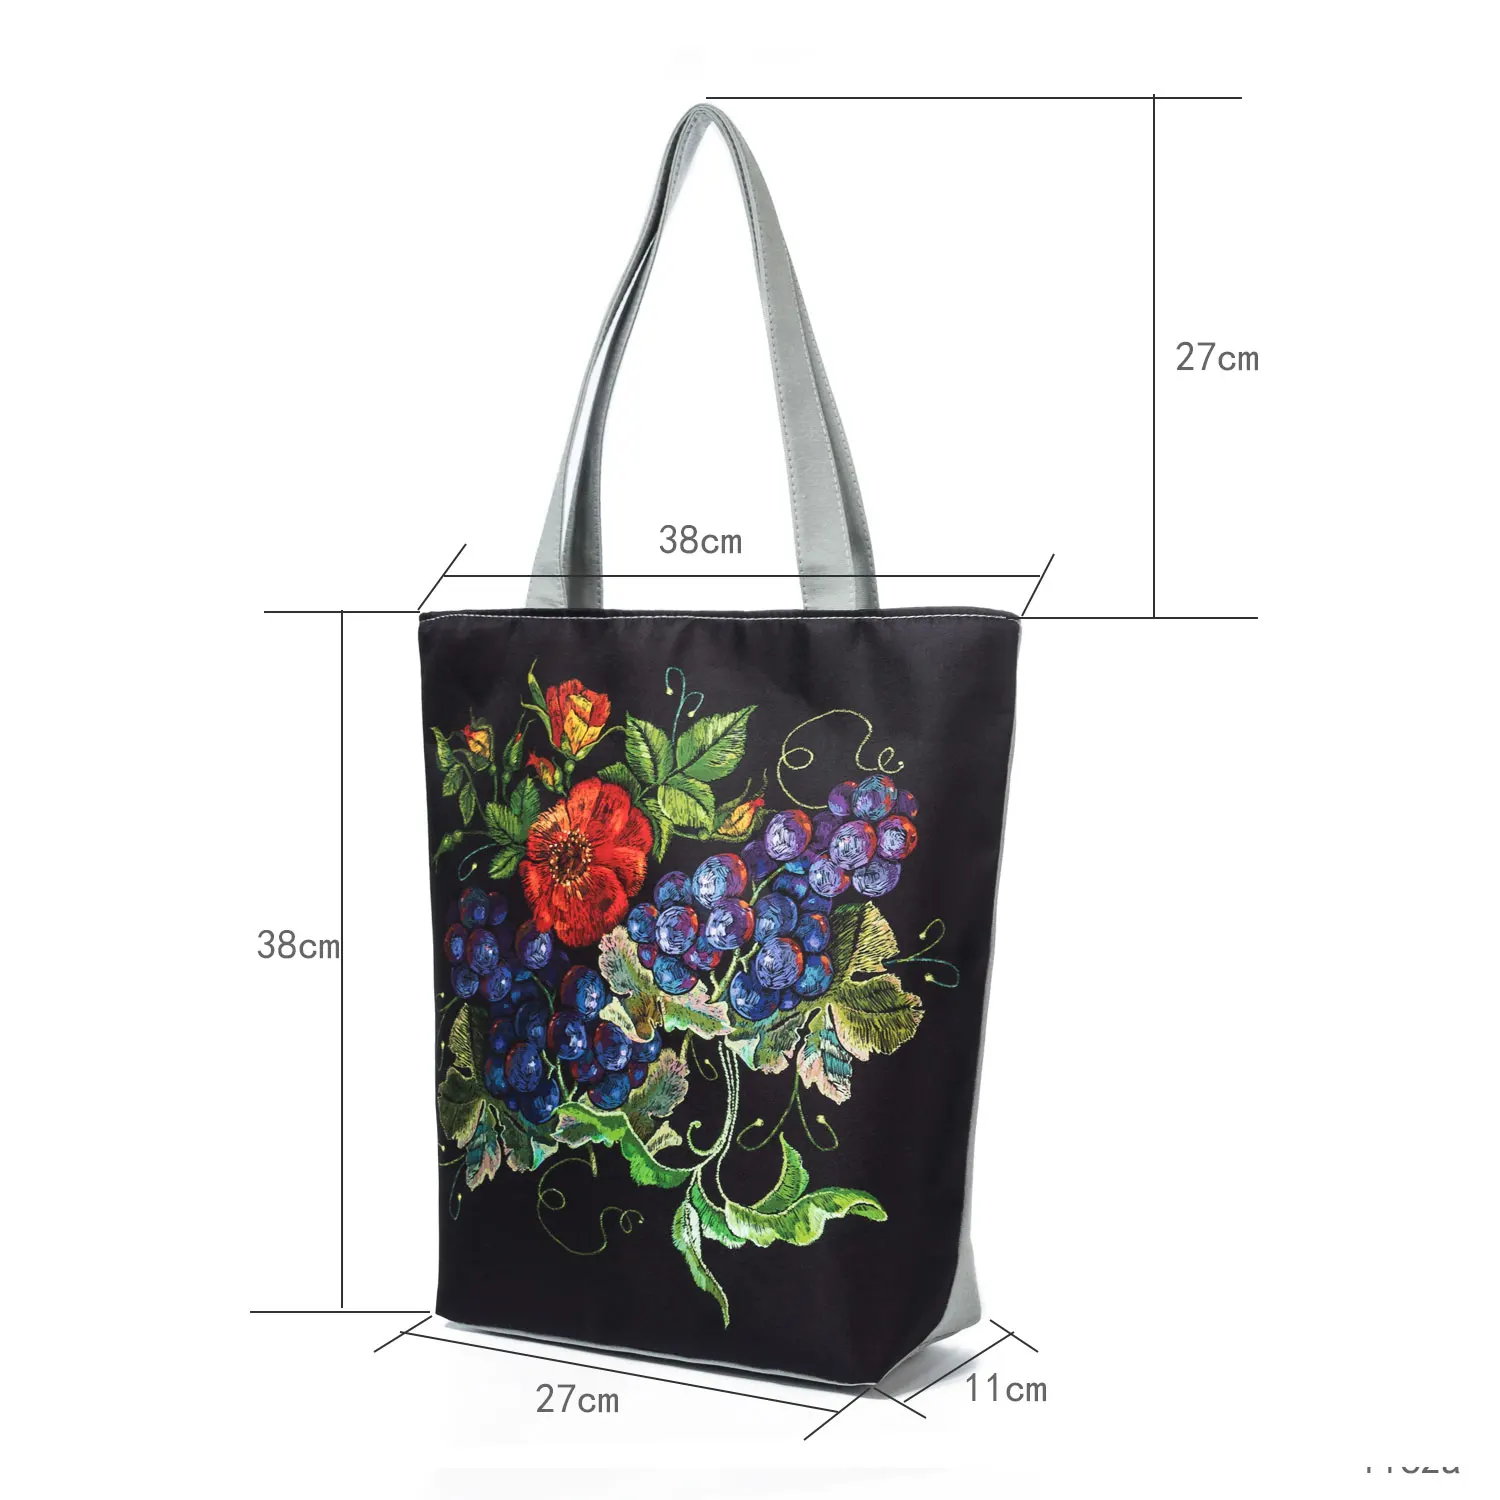 Female Canvas Handbag Fashion Colorful Embroidery Floral And Bird Printed Lady Shoulder Bag Summer Women Tote Eco Shopping Bag